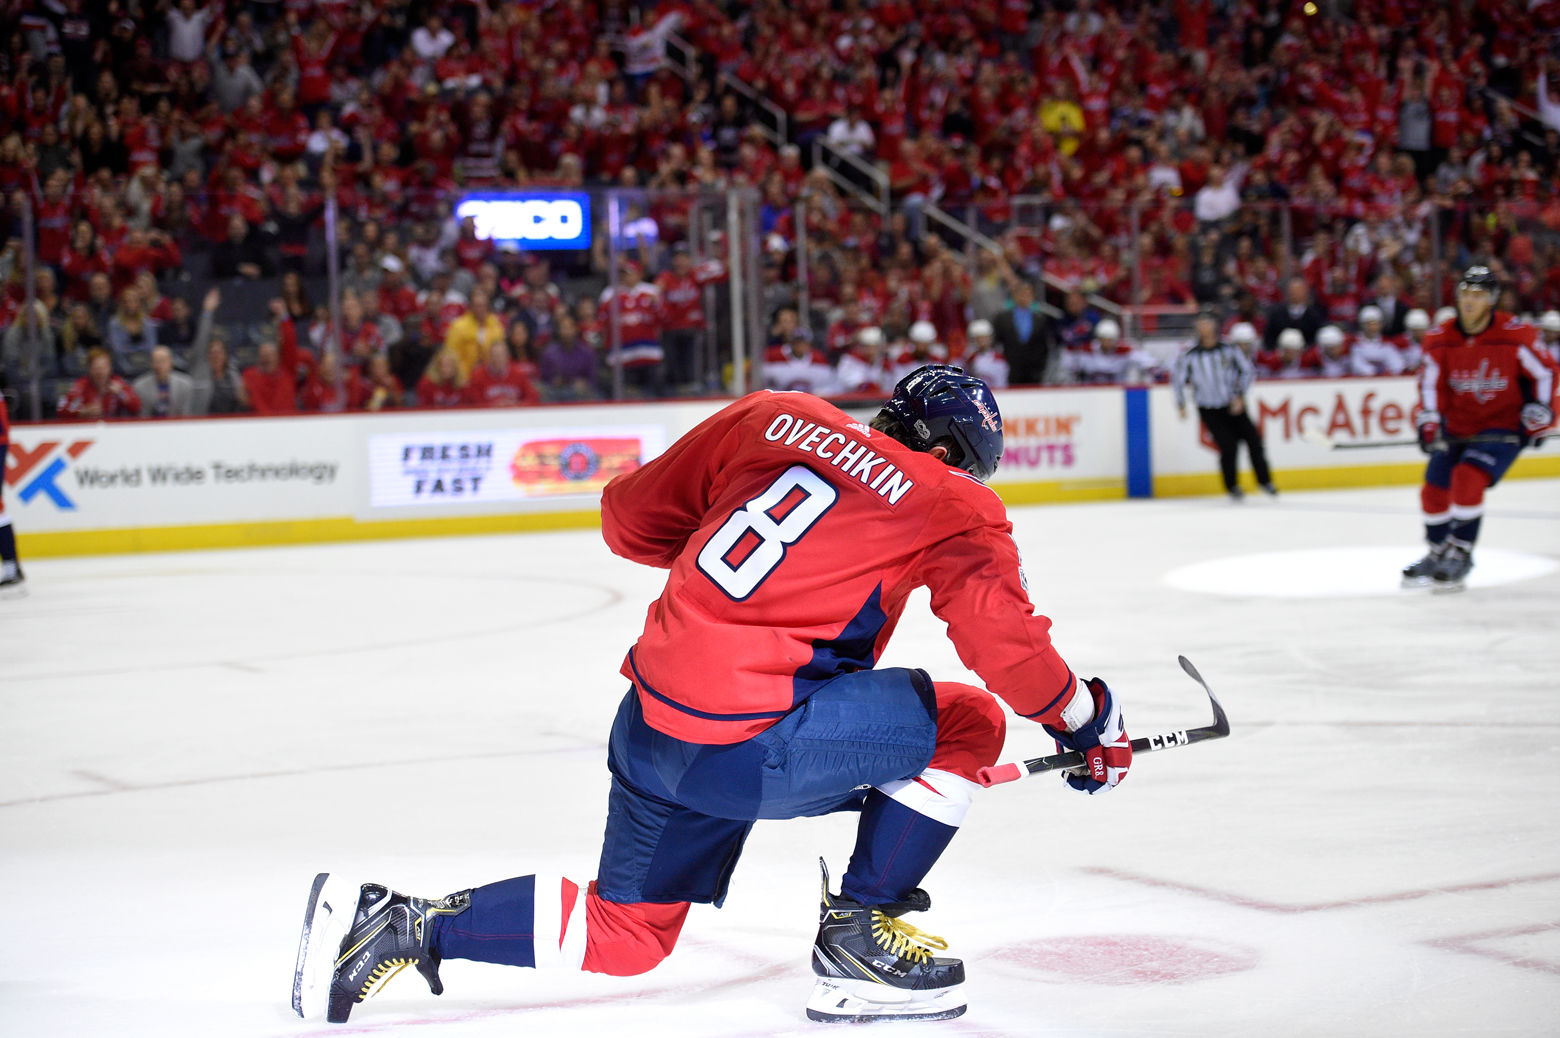 Washington Capitals left wing Alex Ovechkin (8), of Russia, celebrates his goal during the first period of a NHL hockey game against the Montreal Canadiens, Saturday, Oct. 7, 2017, in Washington. (AP Photo/Nick Wass)